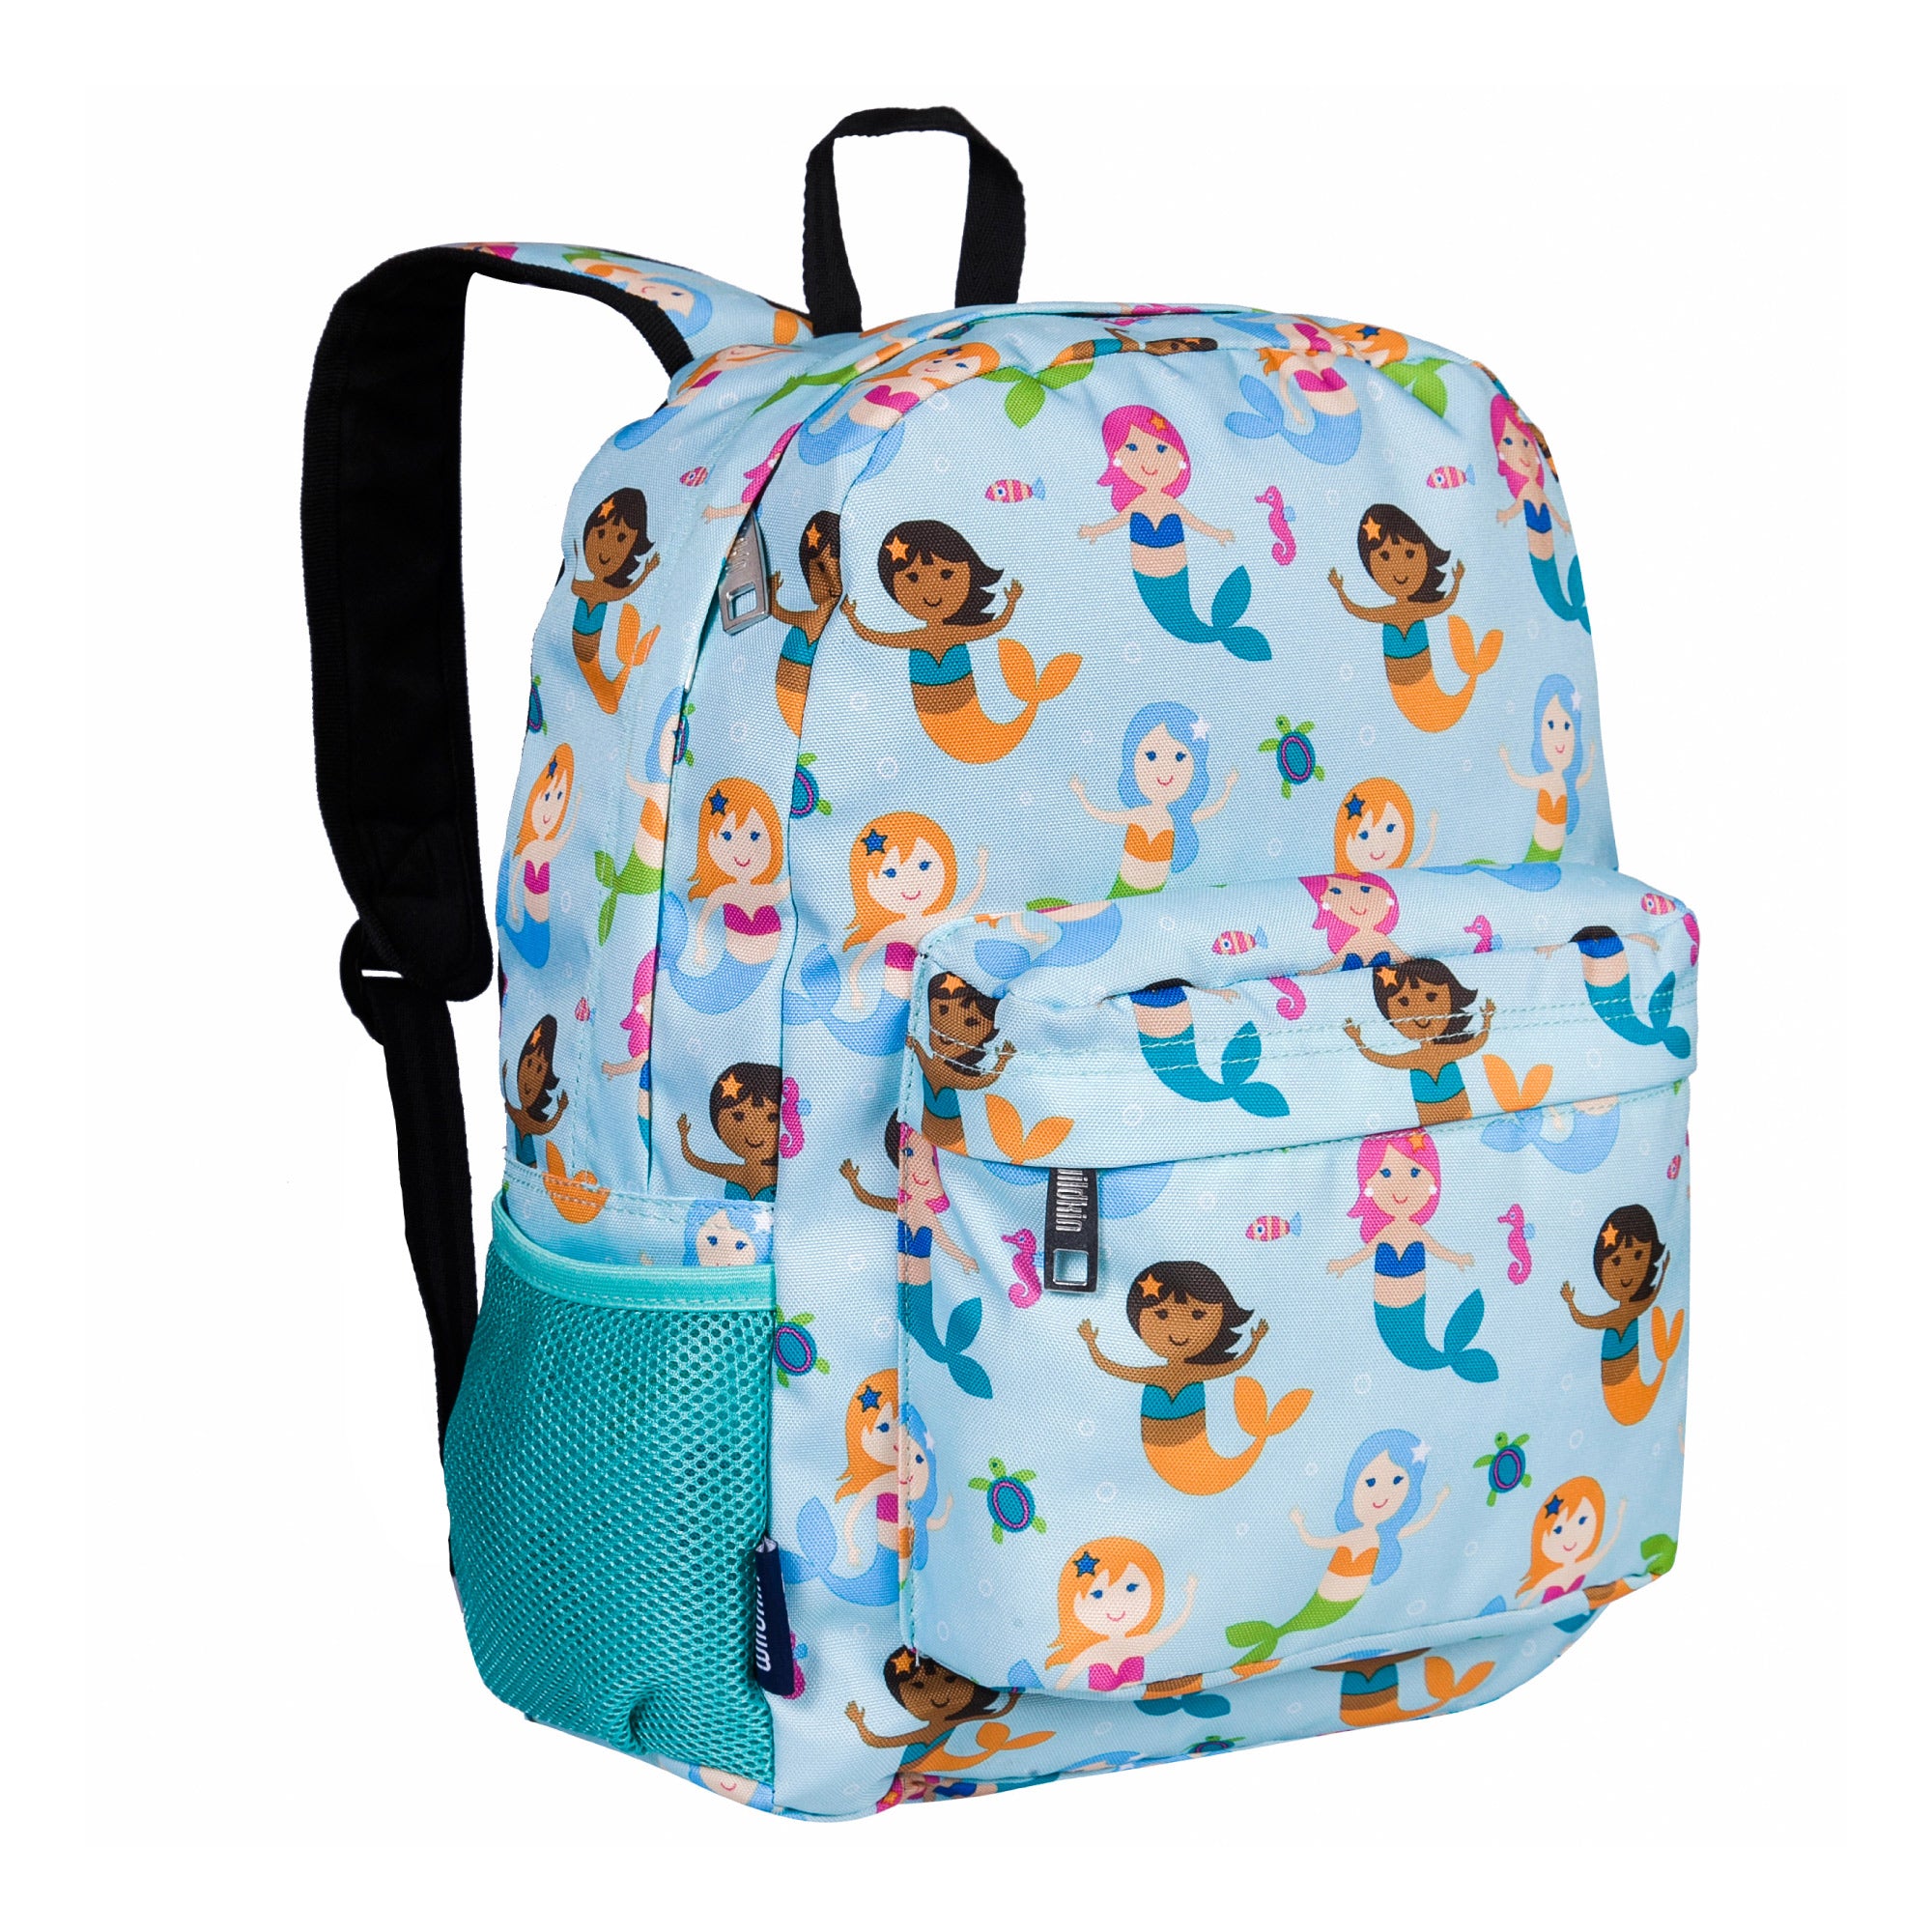 Lilo and Stitch Backpack Stitch Teens or Kids Backpack 16 inch